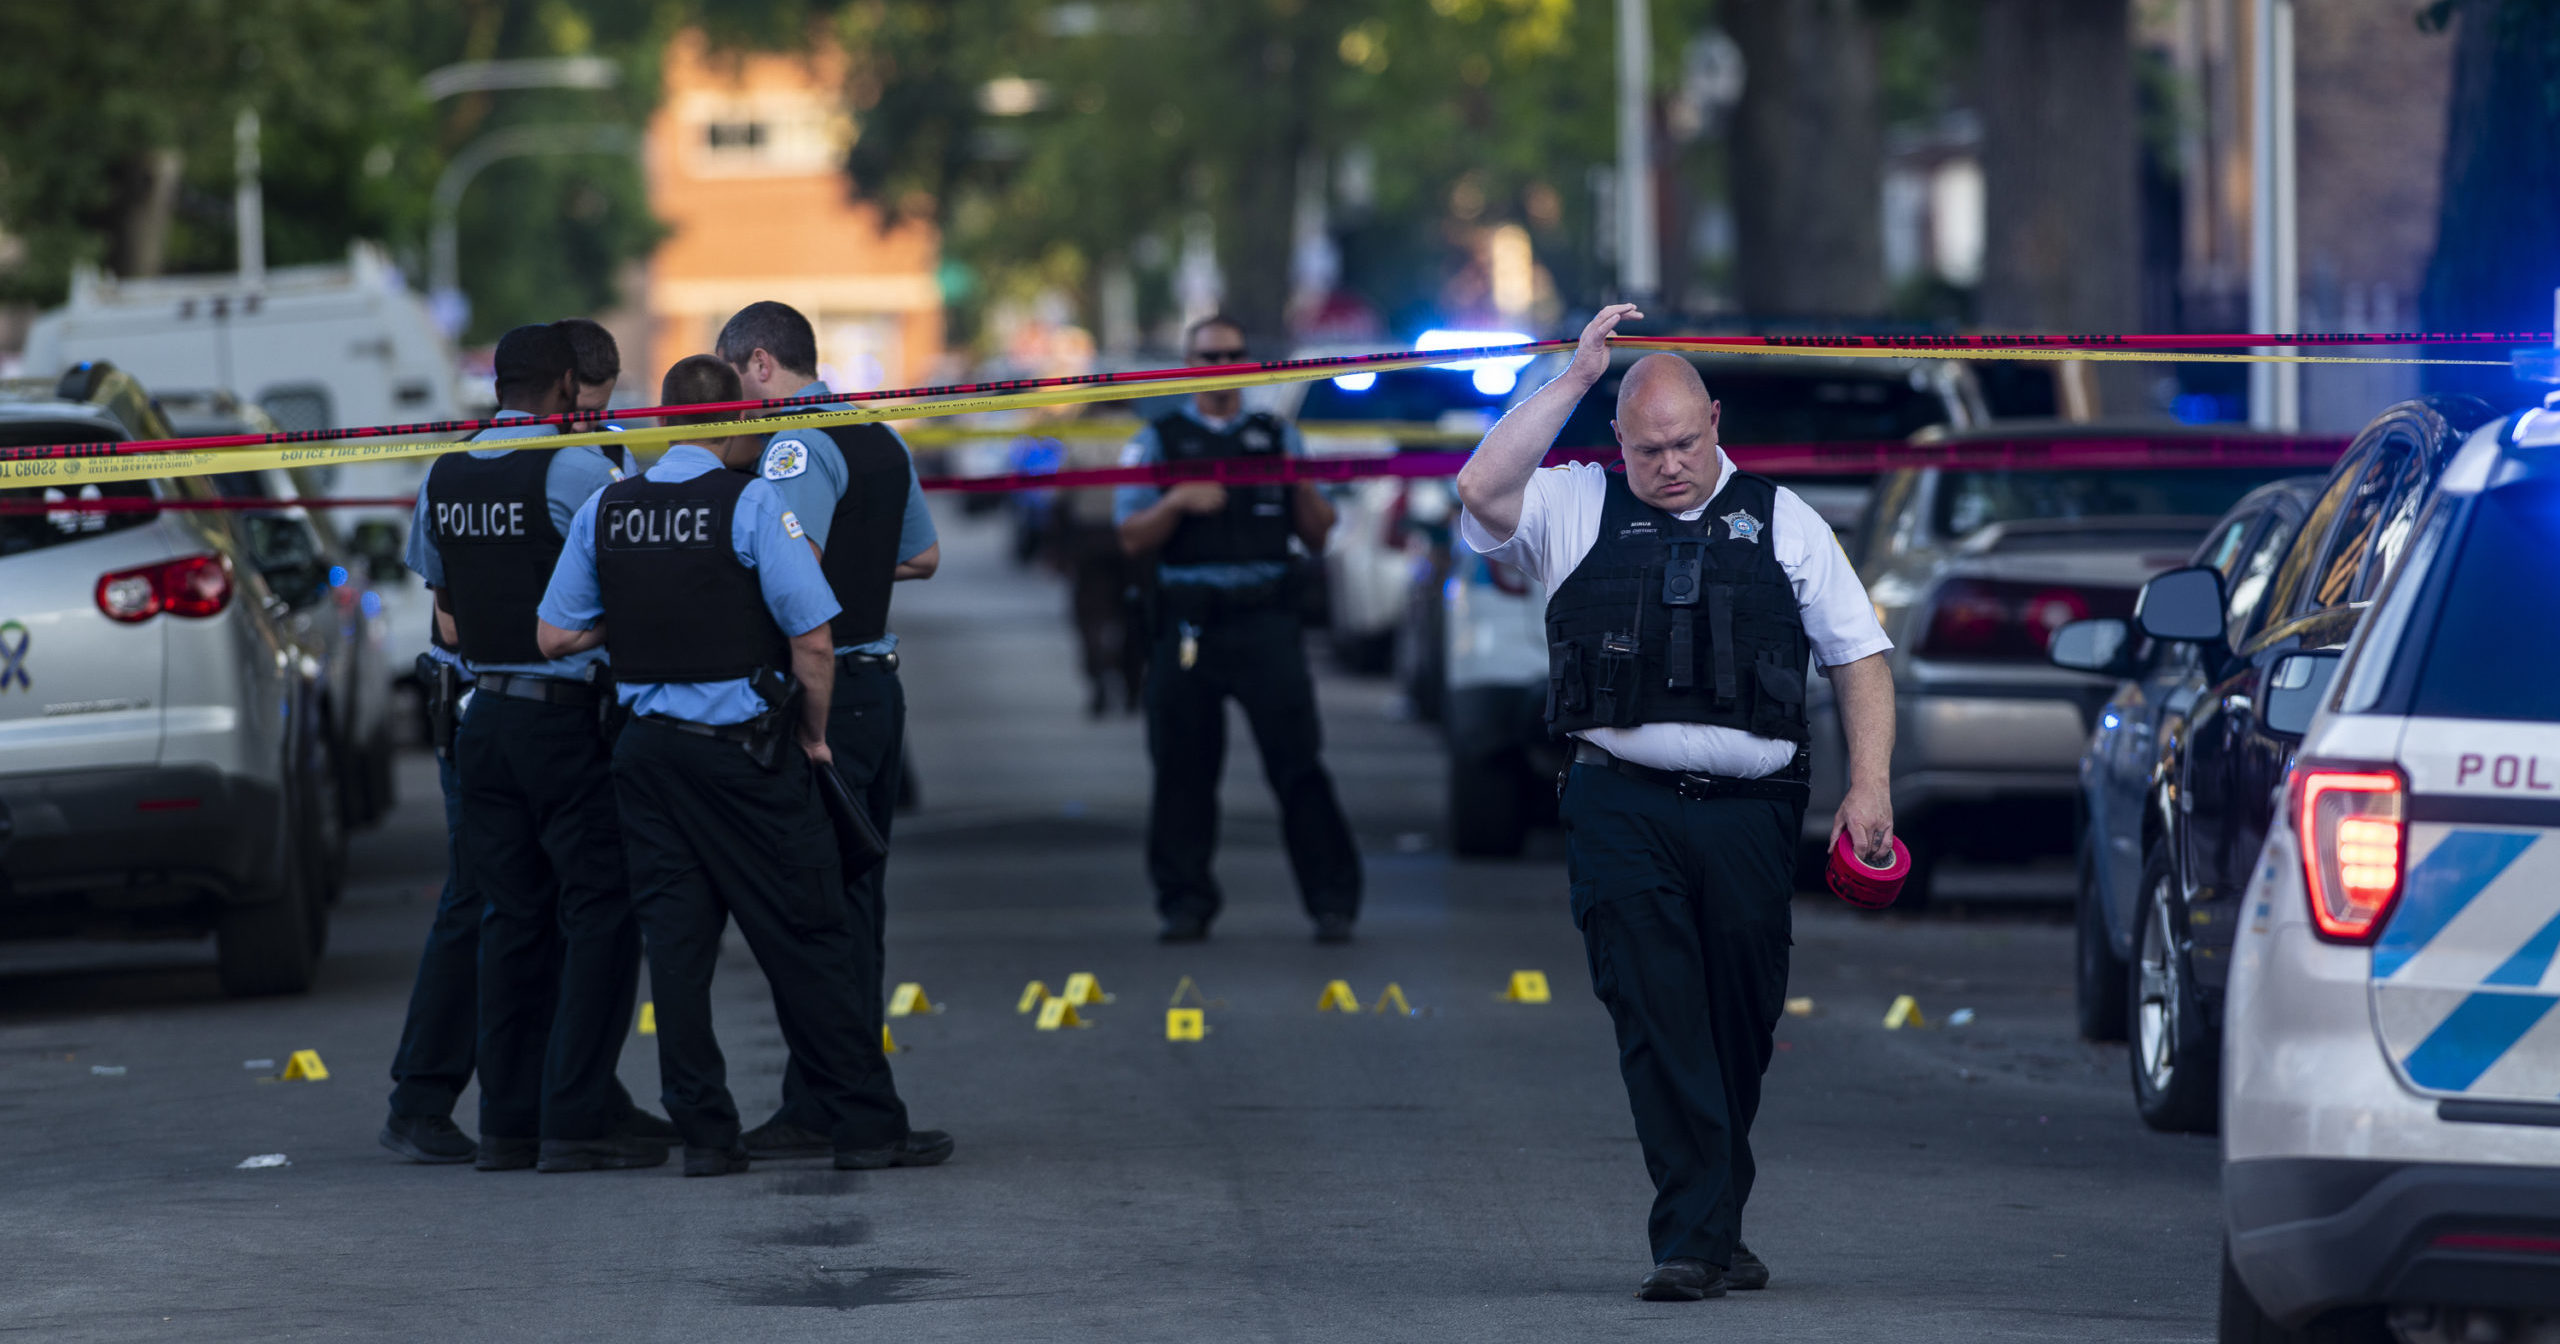 Chicago police officers investigate the scene of a deadly shooting July 5, 2020, in which a 7-year-old girl and a man were fatally shot during a Fourth of July party.